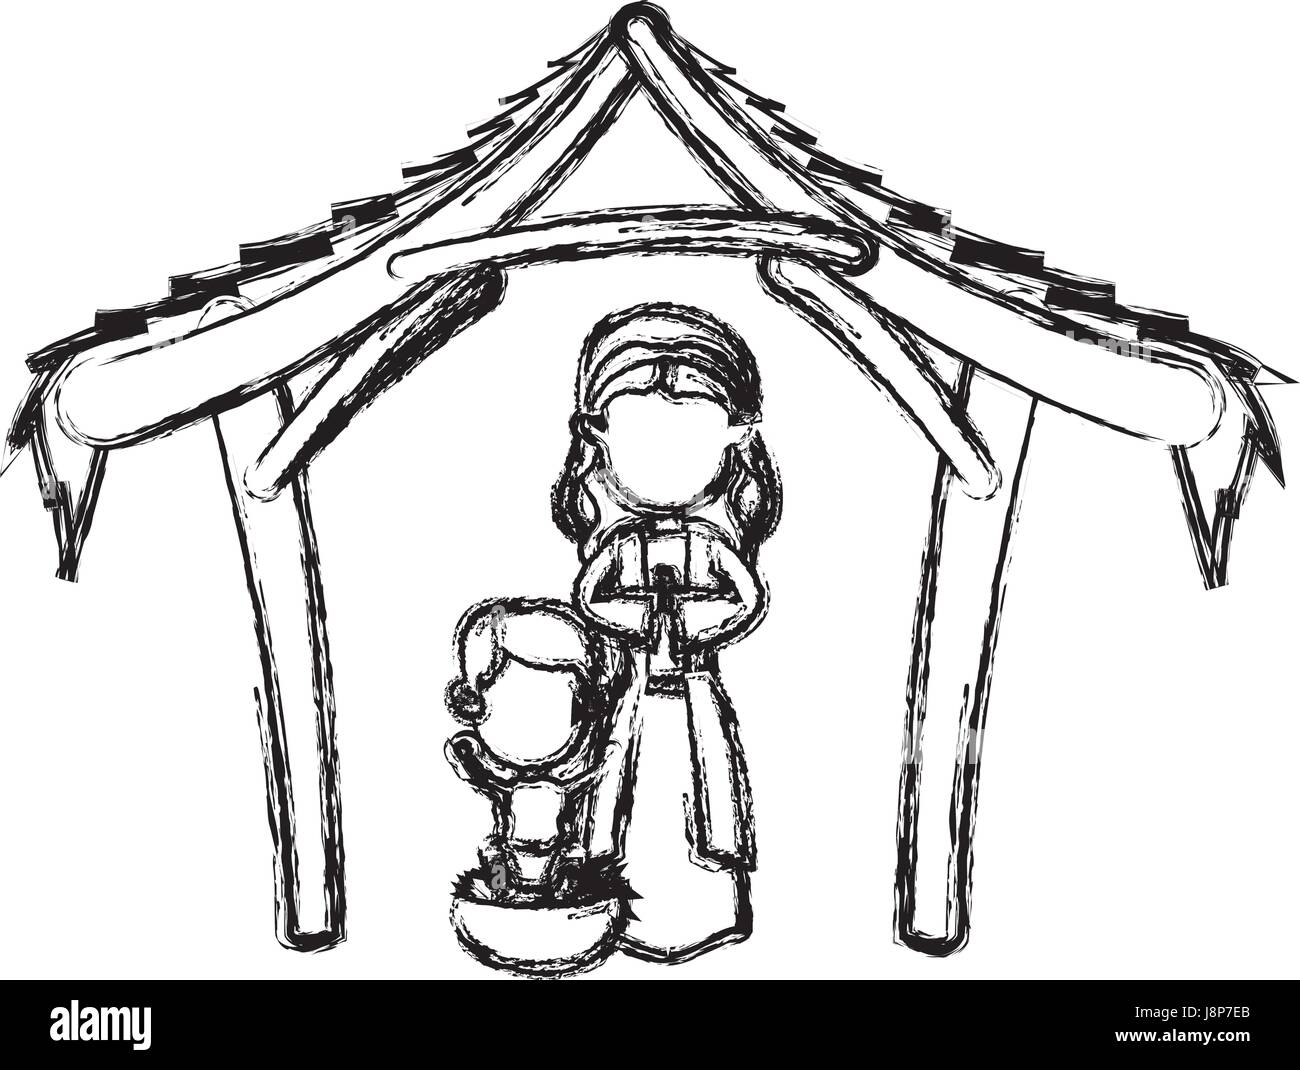 manger virgin mary and baby jesus in hut image Stock Vector